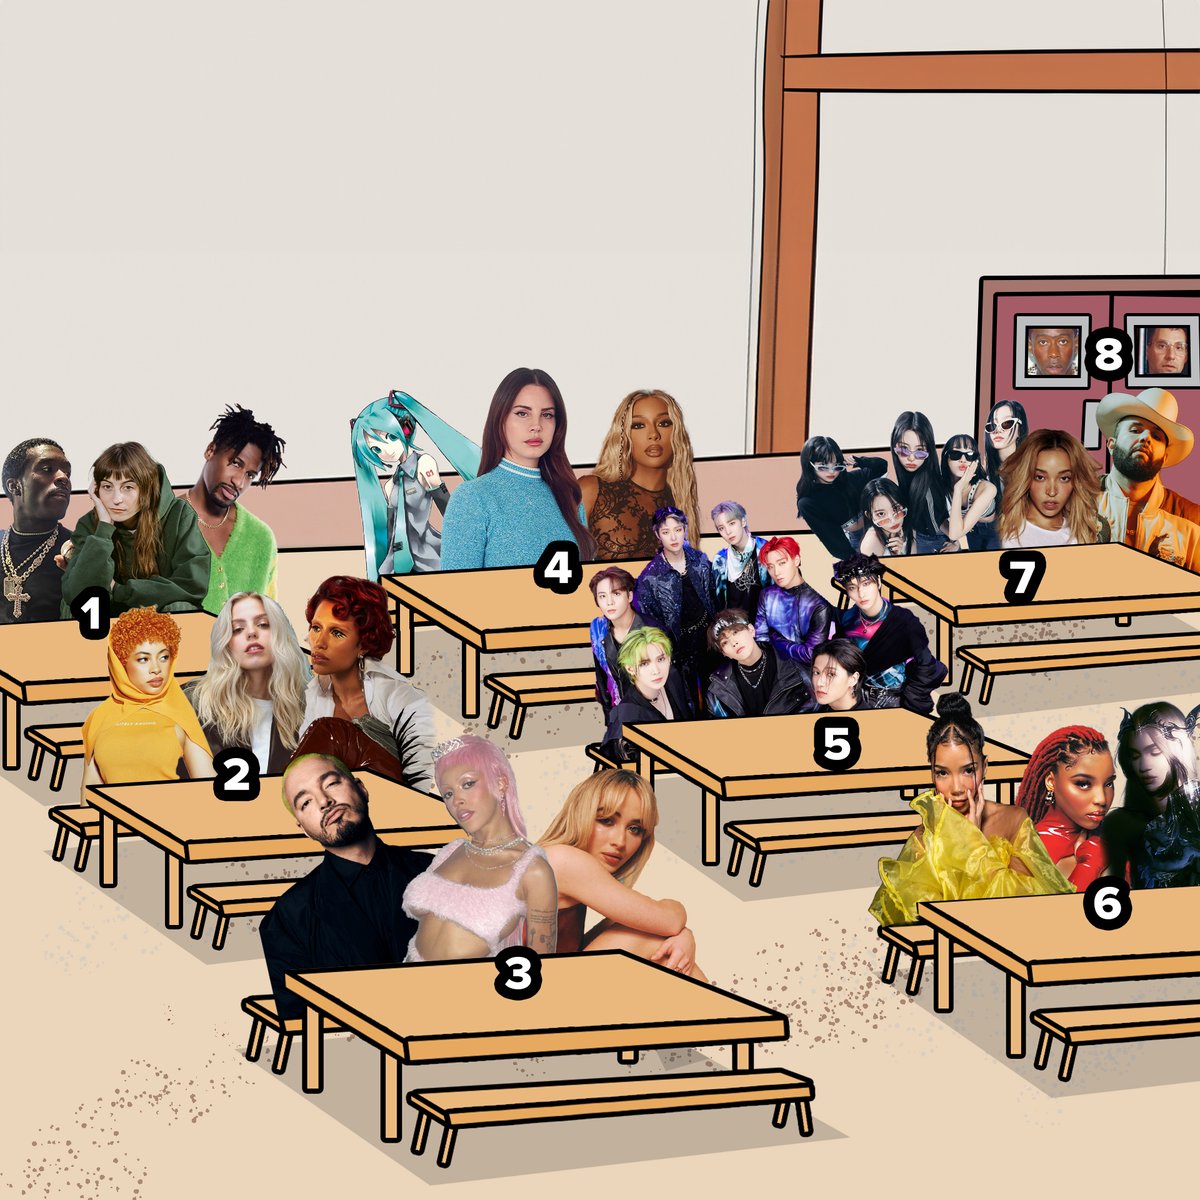 you walk into the #coachella cafeteria and everyone’s looking at you like 👁️👄👁️ which table are you sitting at?